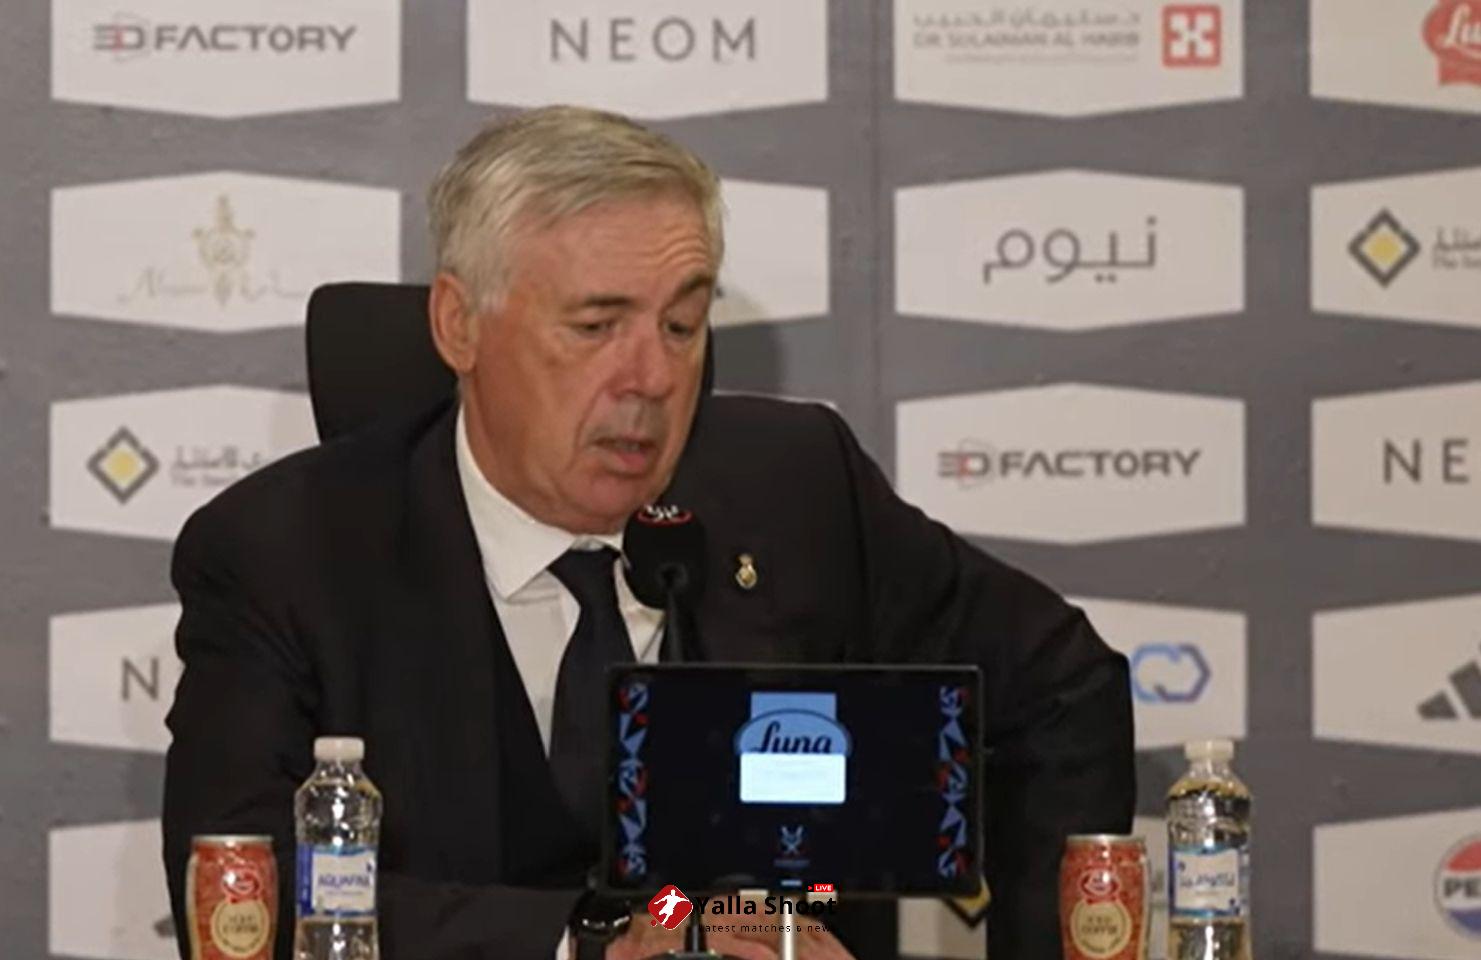 Carlo Ancelotti raises eyebrows after confirmation of goalkeeper situation at Real Madrid